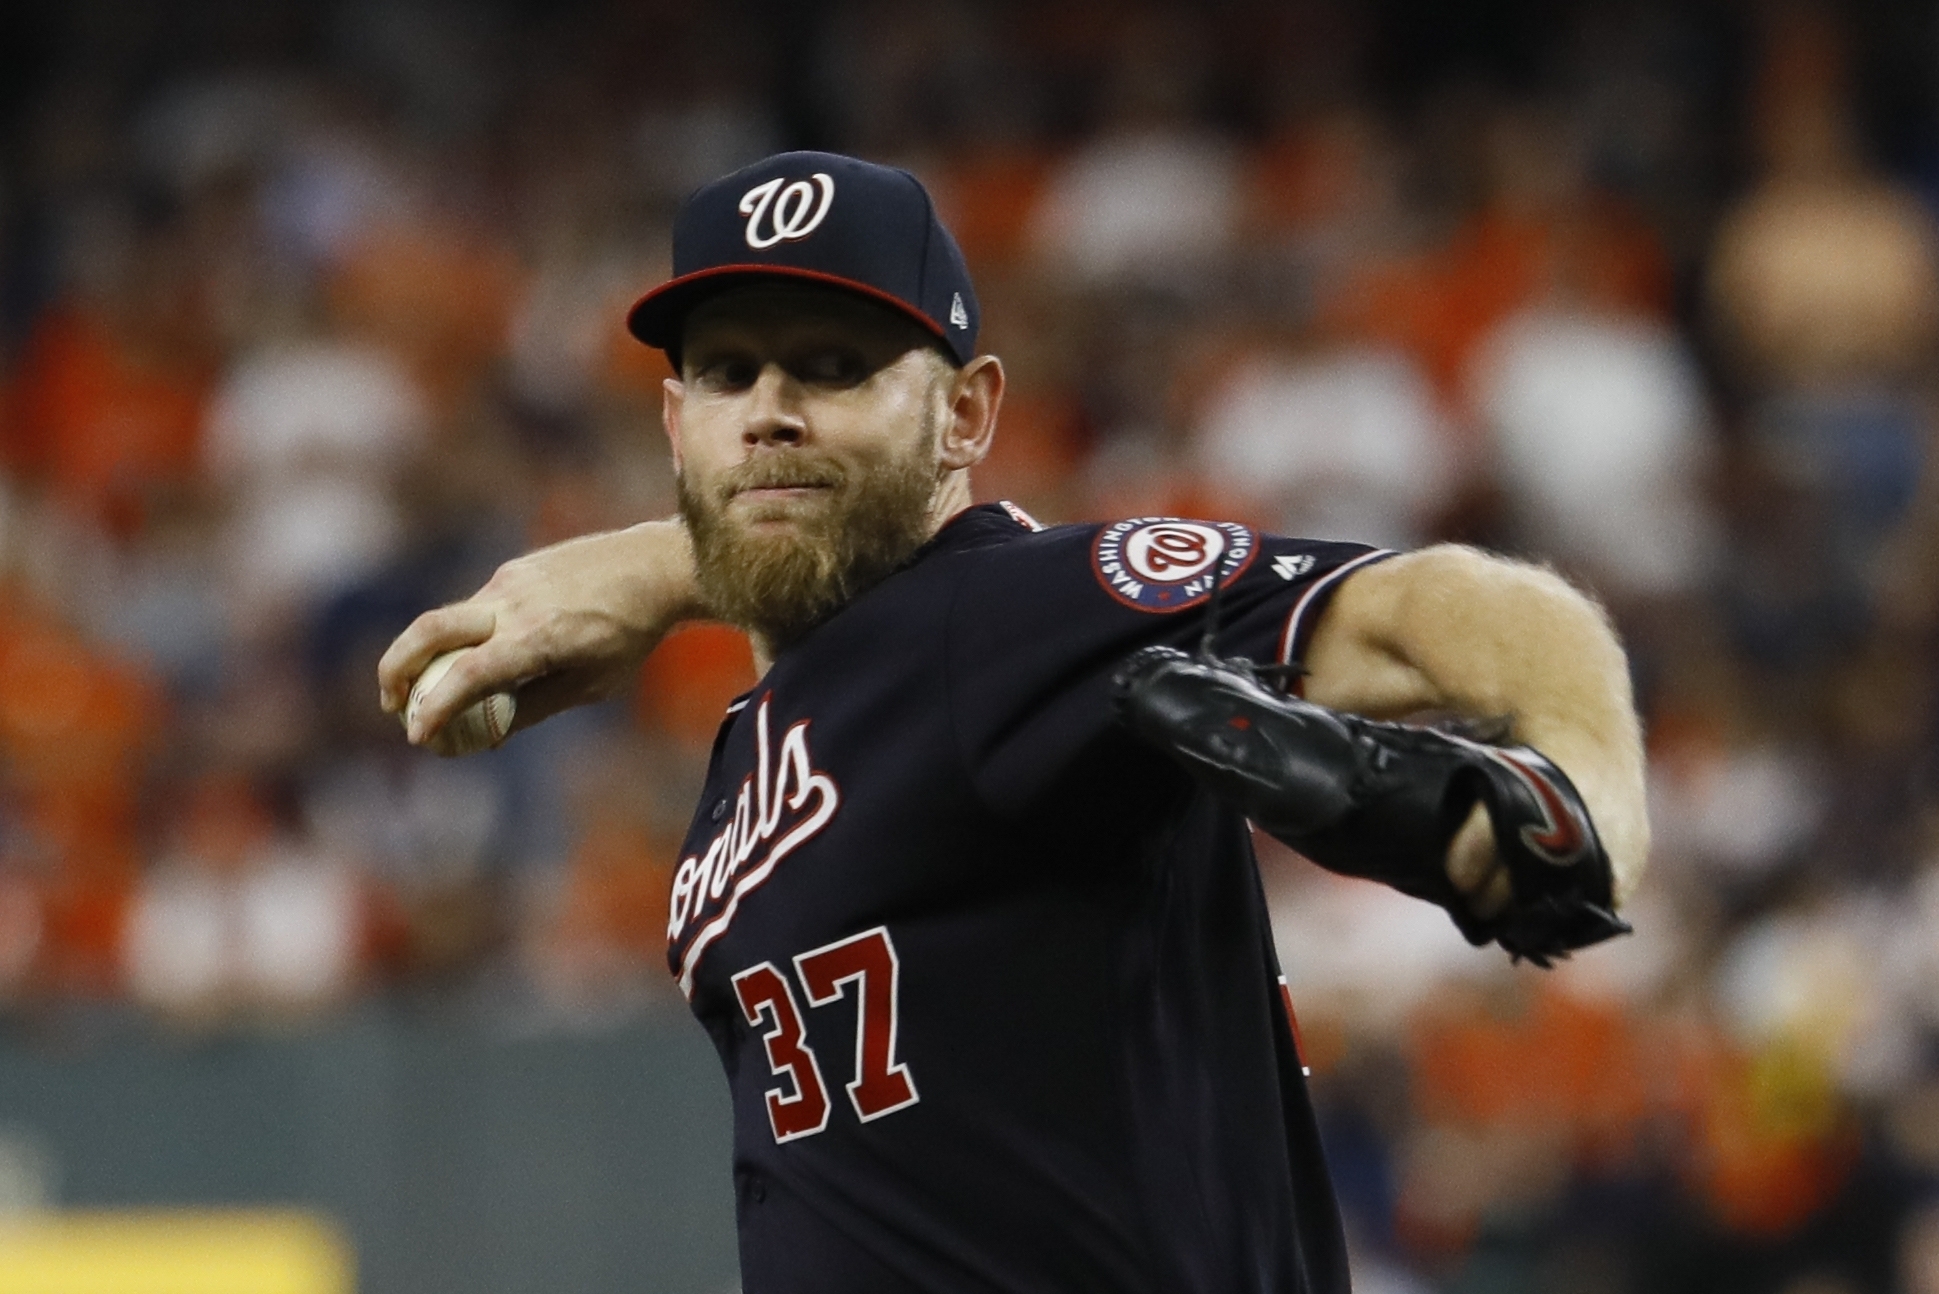 Strasburg strikes out 8, but Astros top Nationals